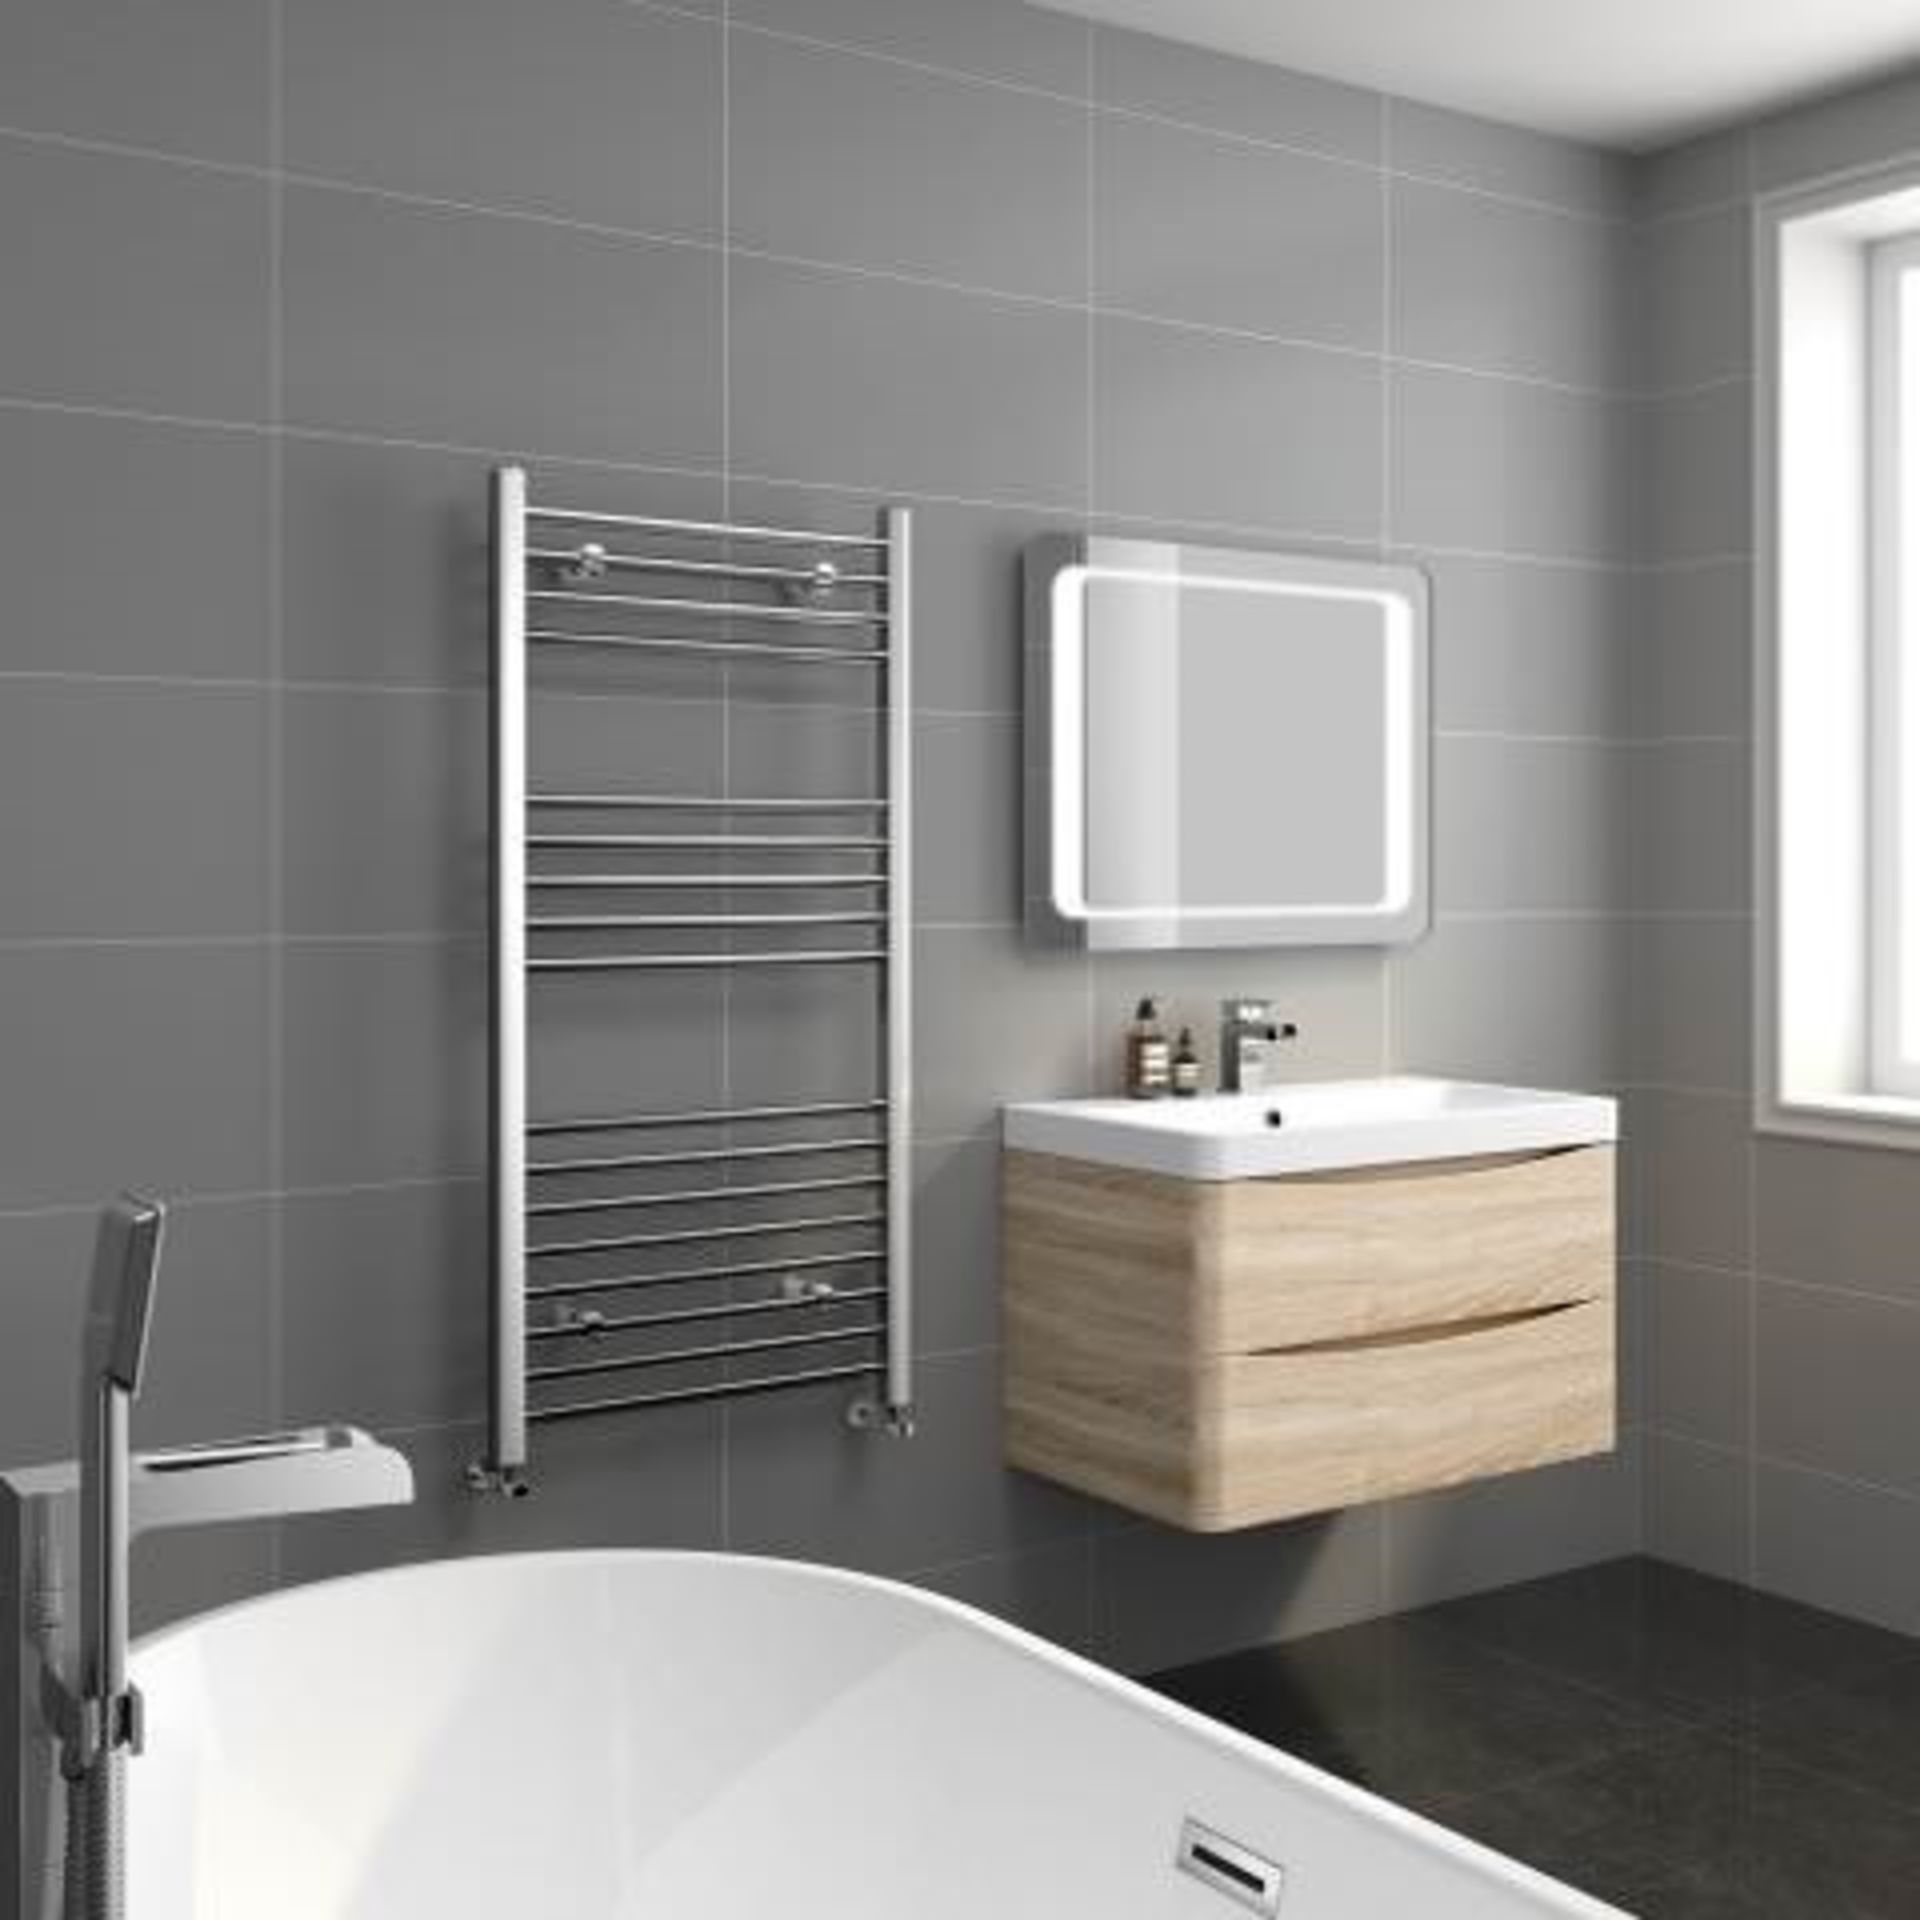 NEW & BOXED 1200x600mm - 20mm Tubes - Chrome Heated Straight Rail Ladder Towel Radiator.RRP £2... - Image 2 of 3